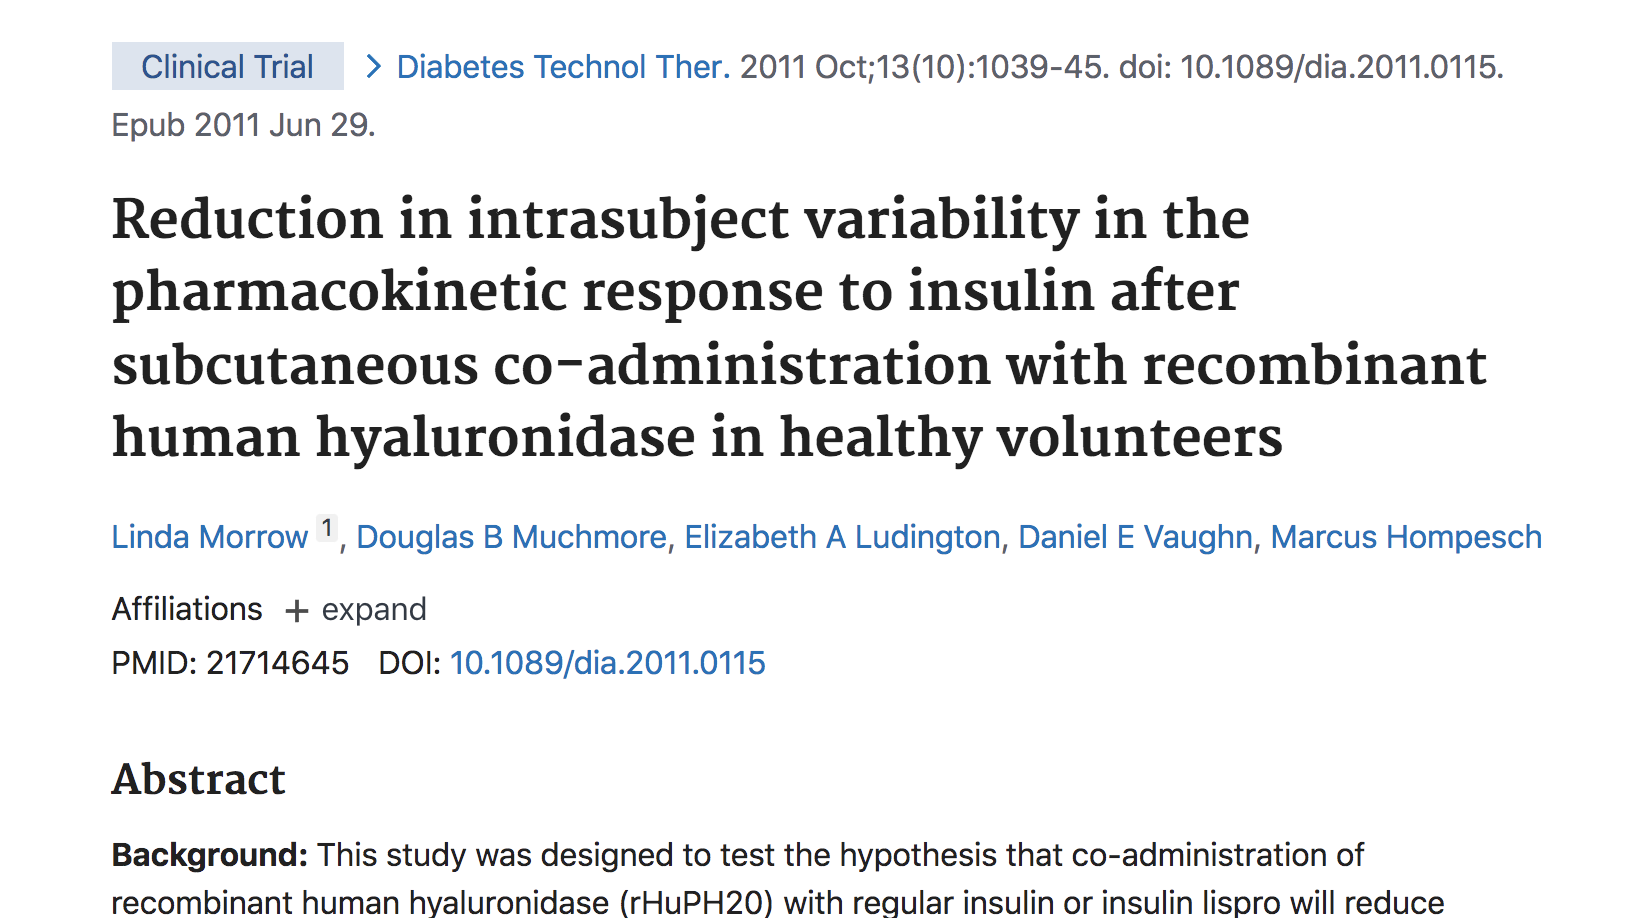 image of Reduction in intrasubject variability in the pharmacokinetic response to insulin after subcutaneous co-administration with recombinant human hyaluronidase in healthy volunteers.